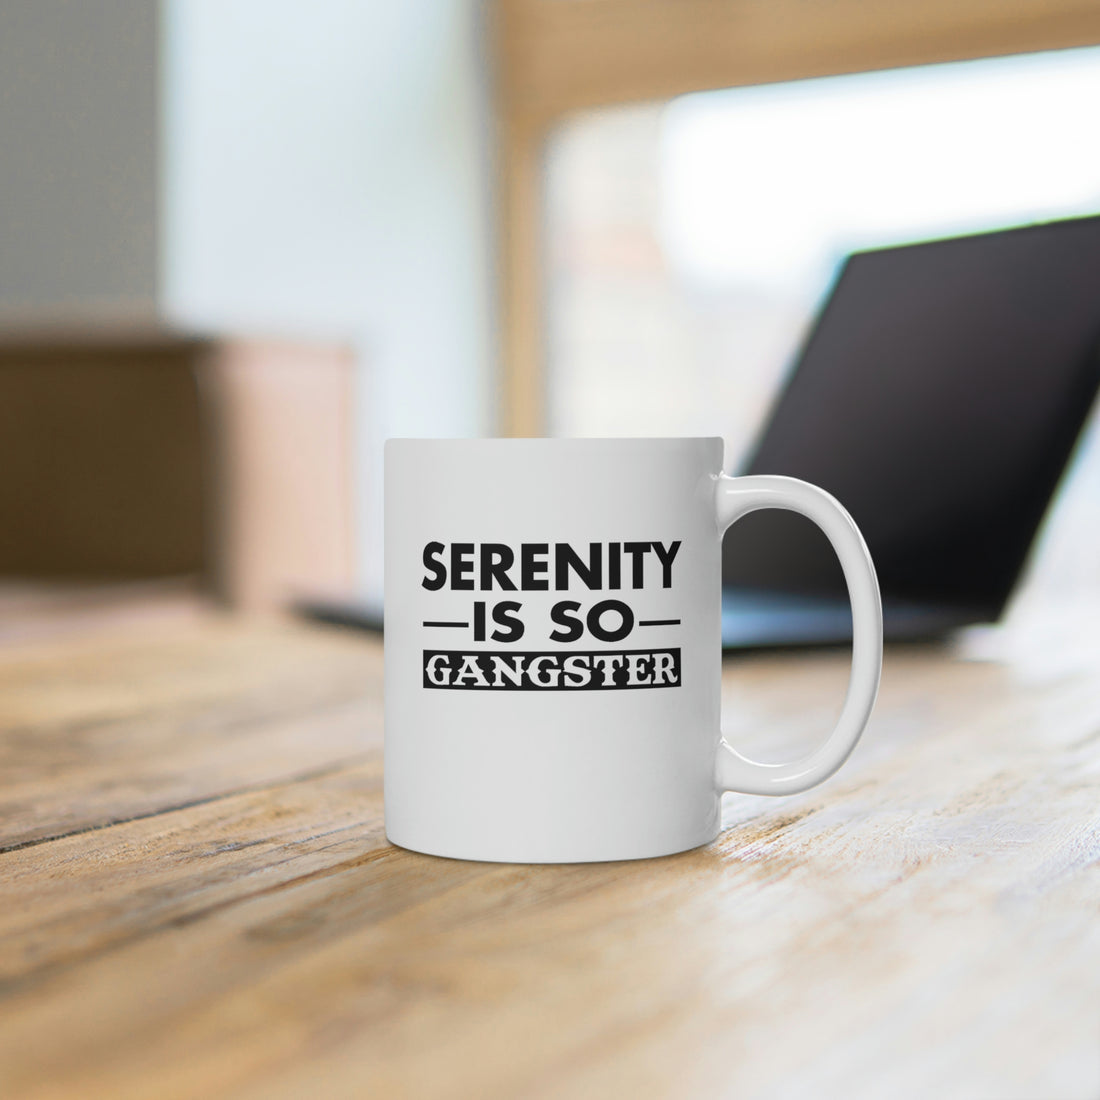 Serenity Is So Gangster - White Ceramic Mug 2 sizes Available